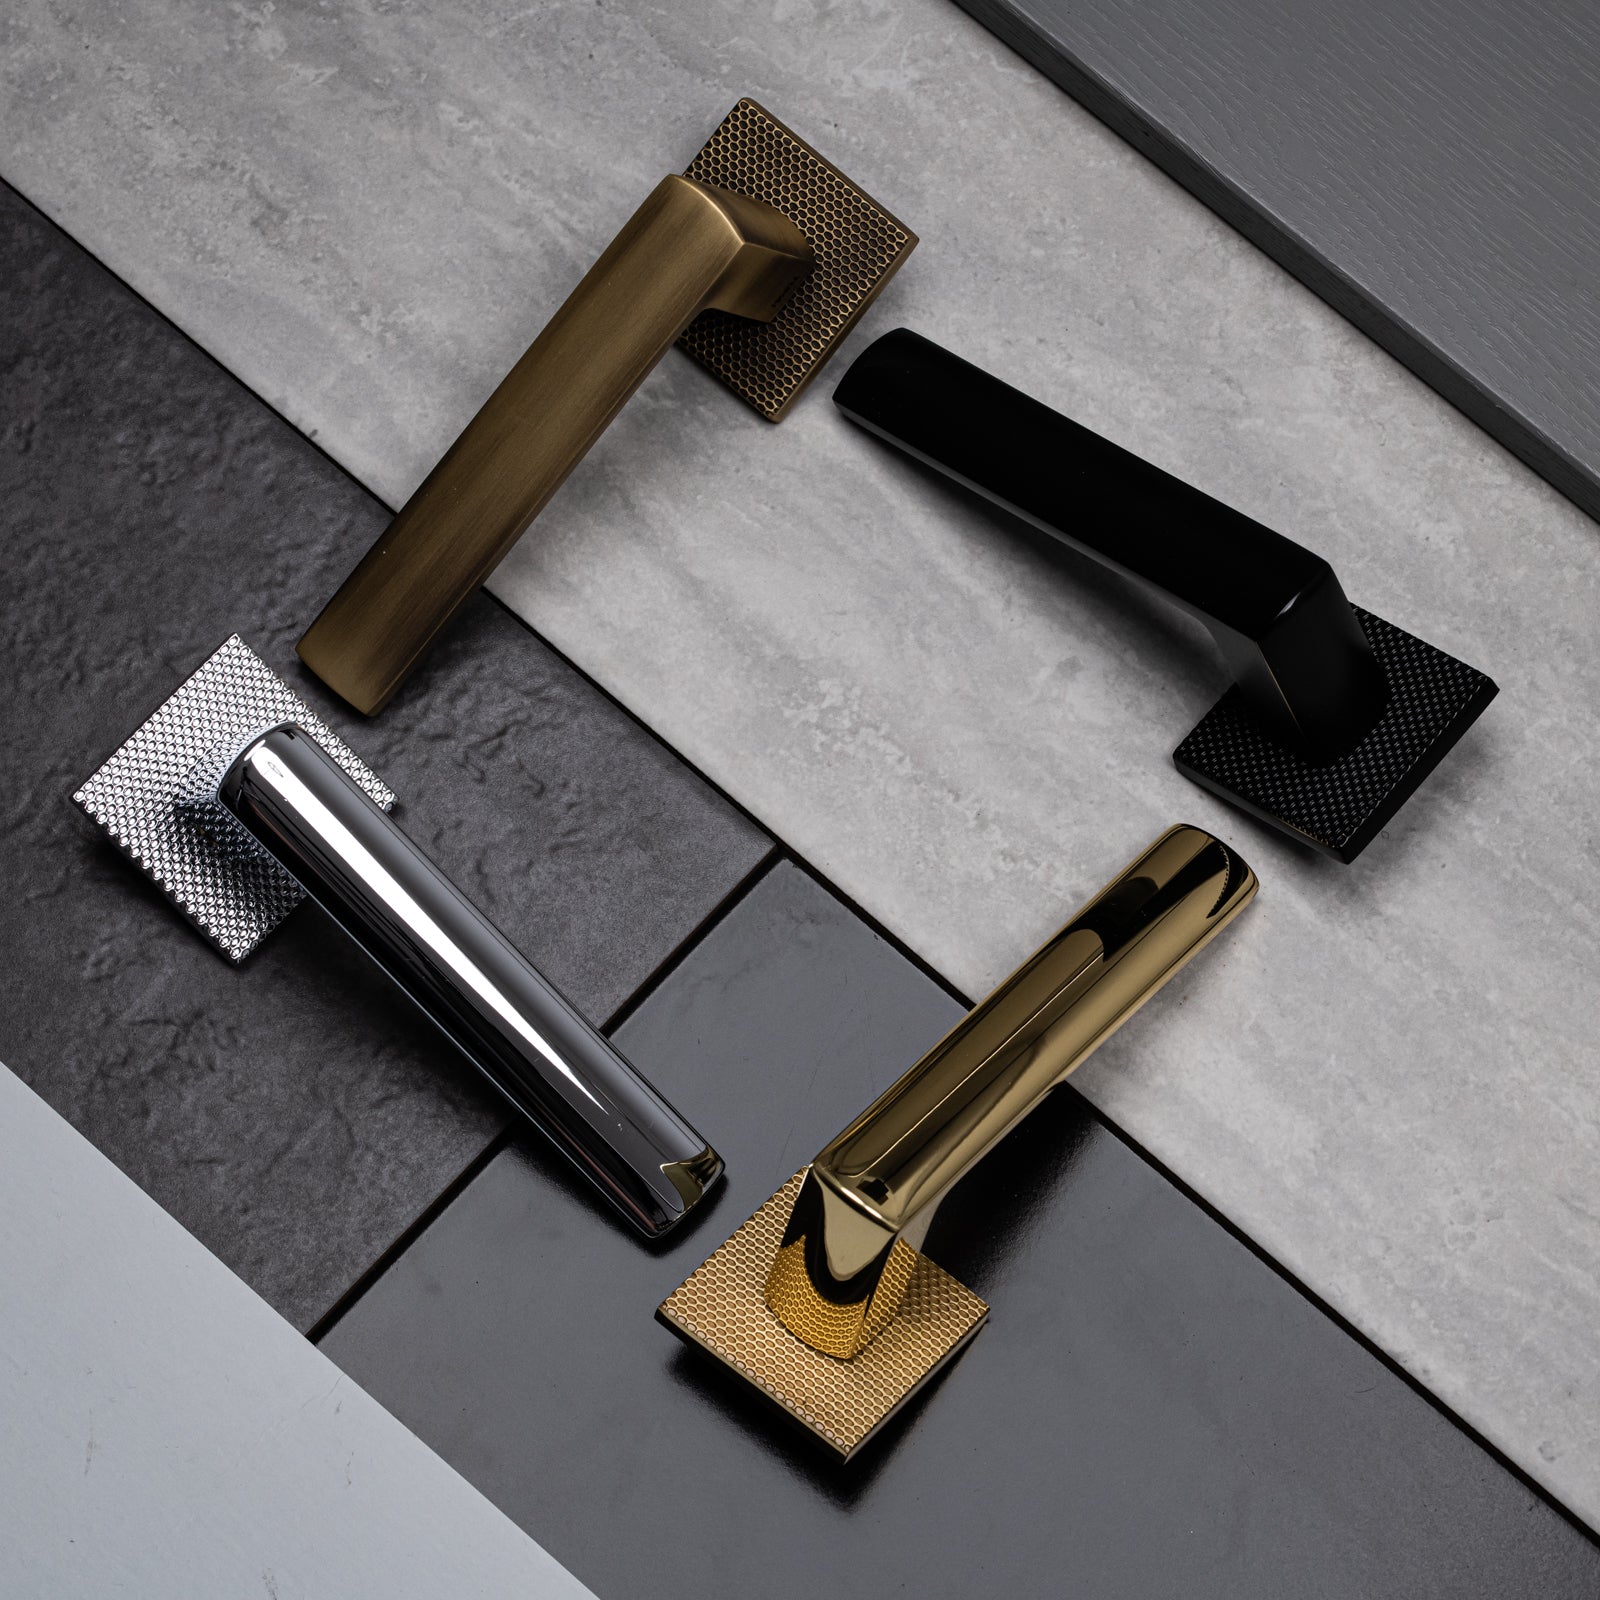 Coroto Waterfall Lever on Rose Lifestyle Image SHOW